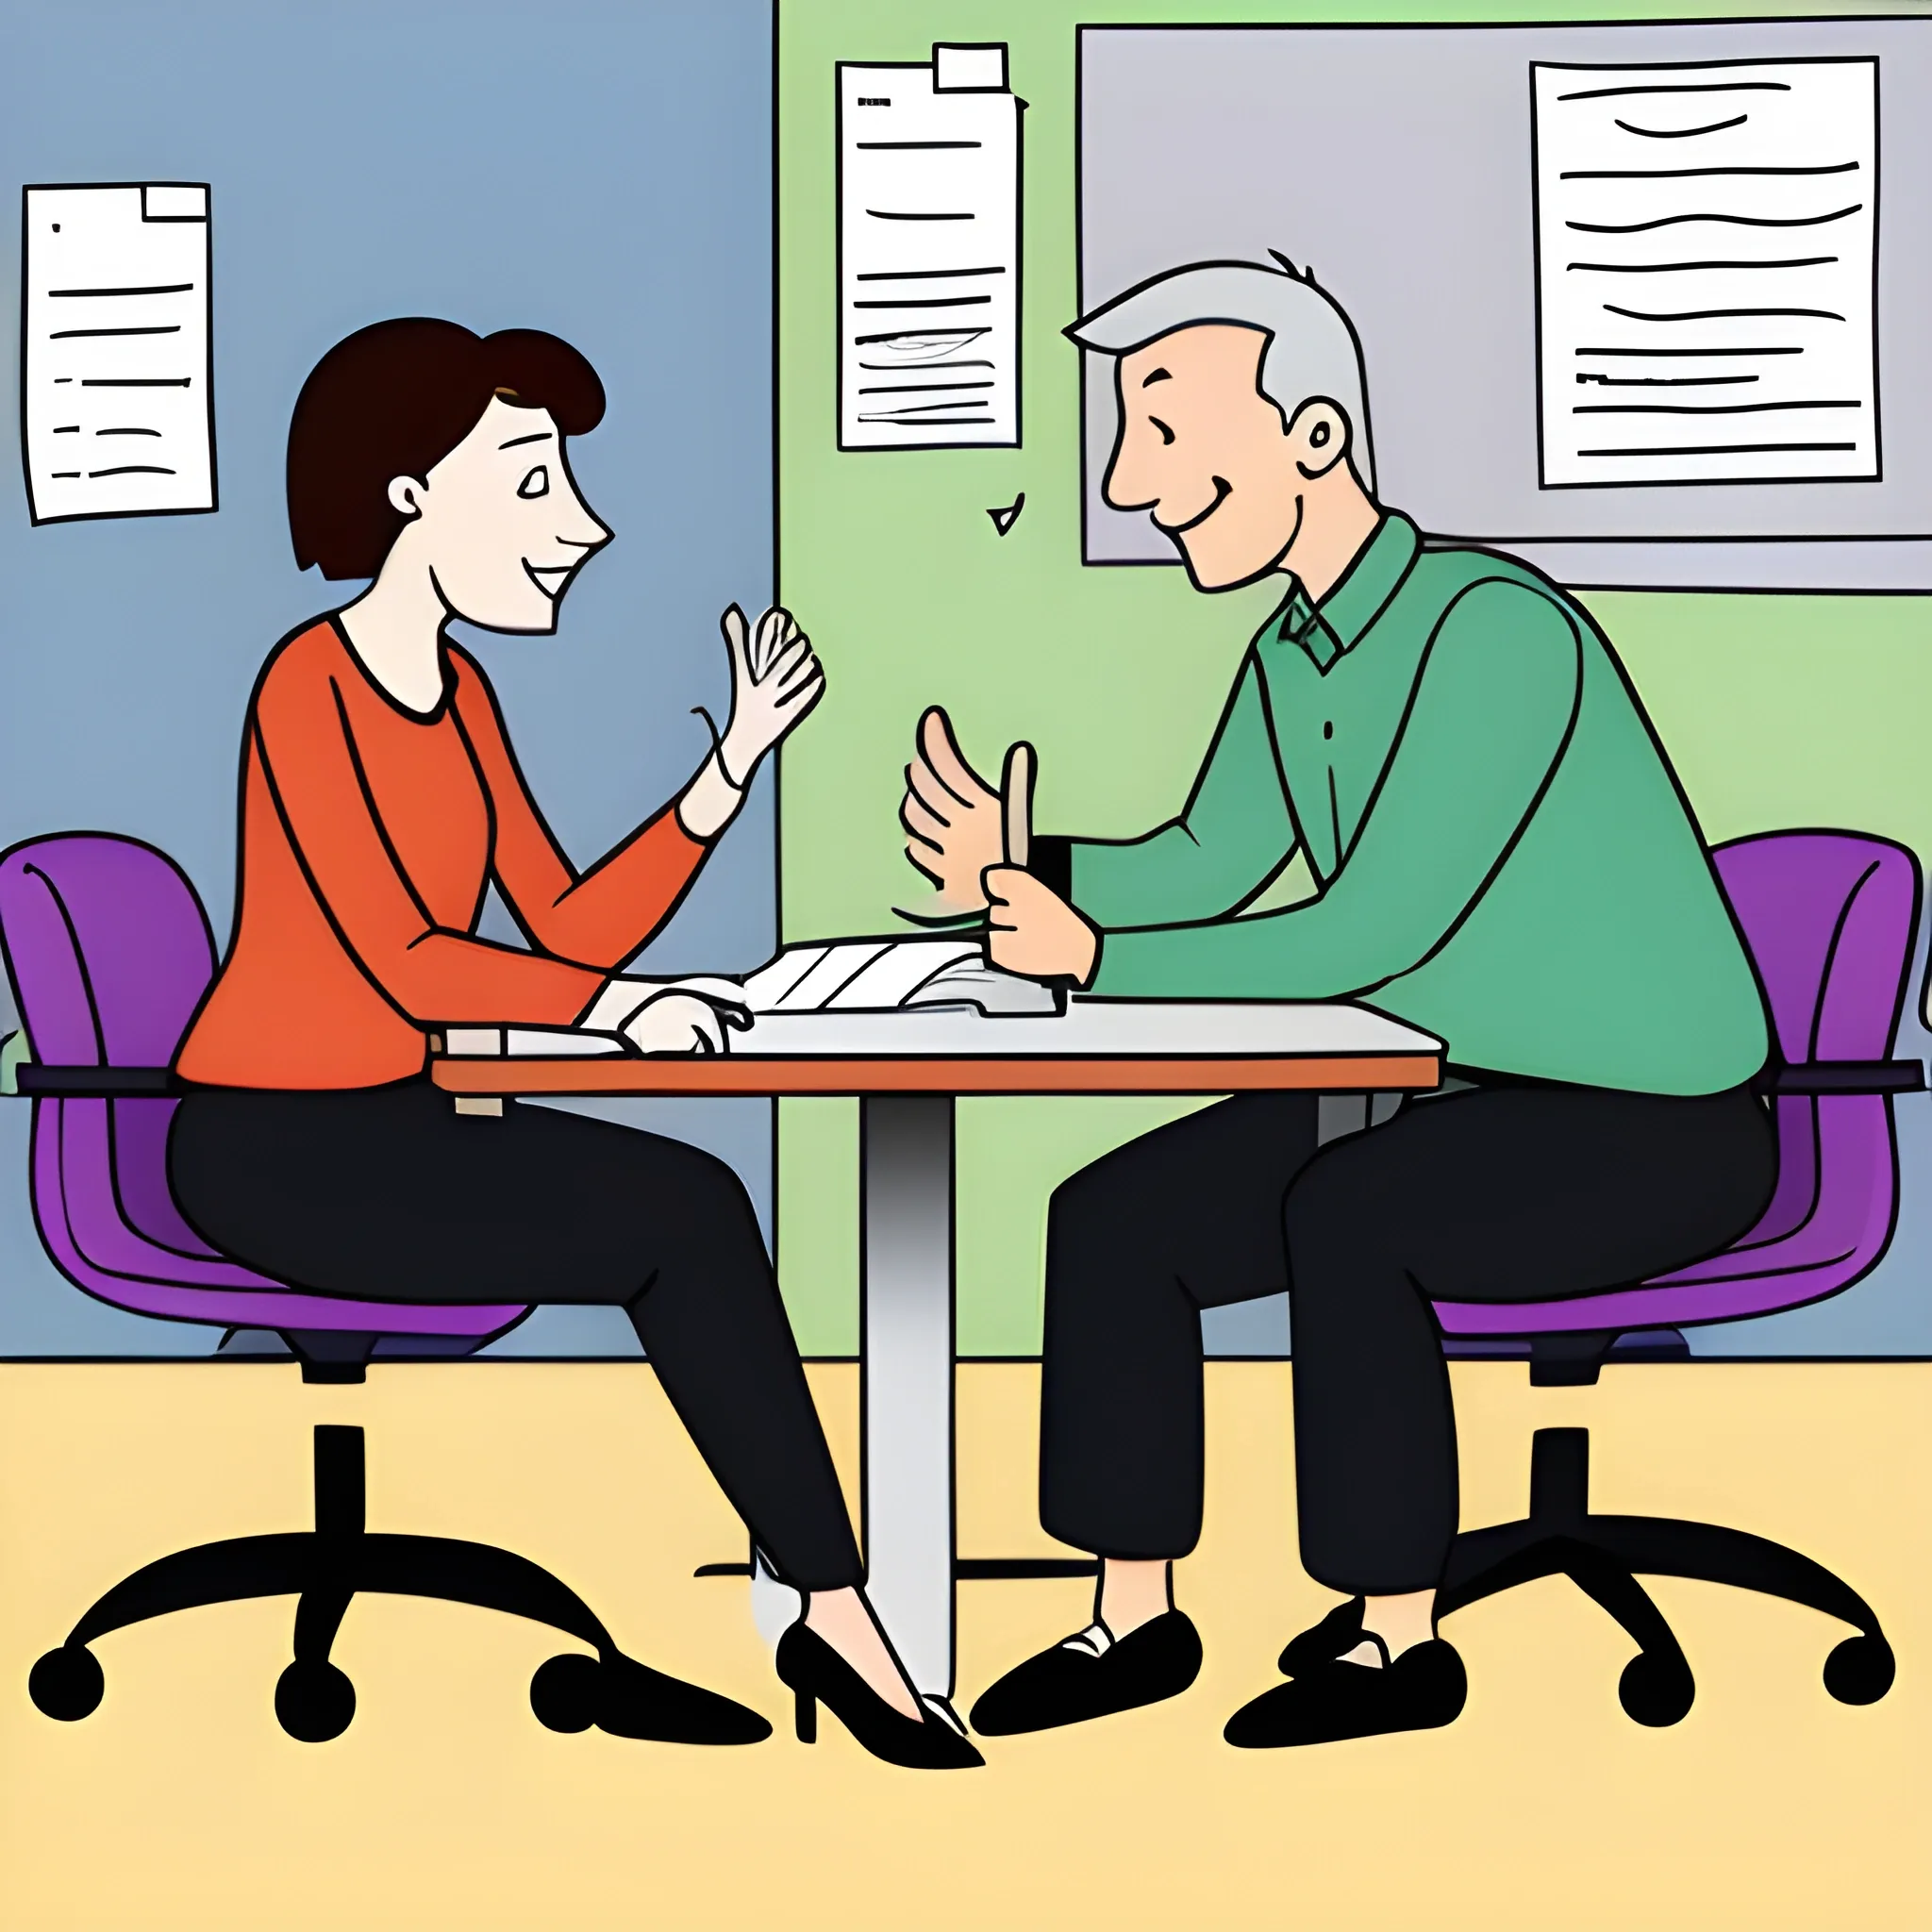 mentoring session between two people, Cartoon, clip art